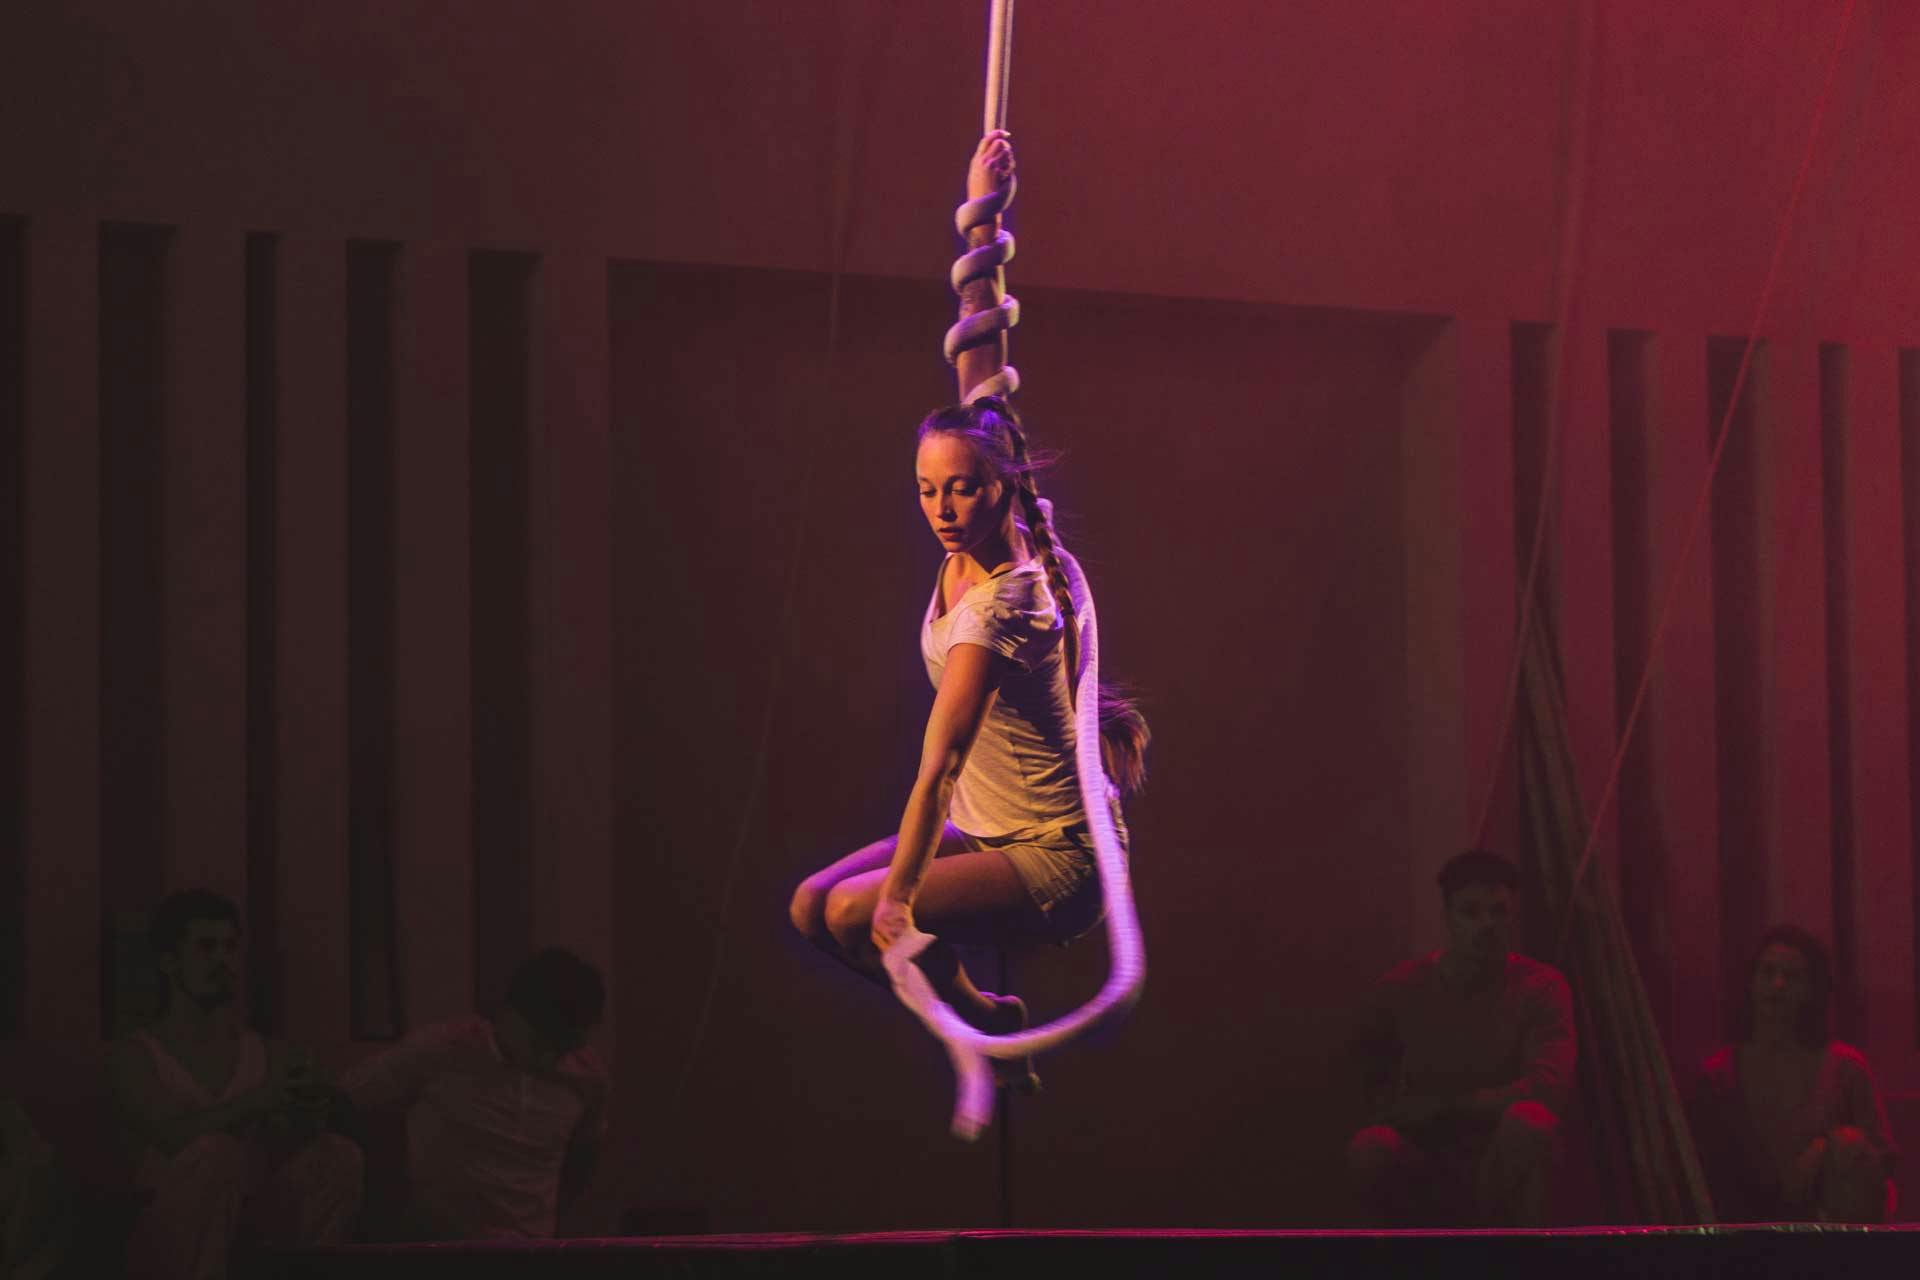 Melinda, during a show, hanging from a rope. The rope is twisted around her arm like a snake